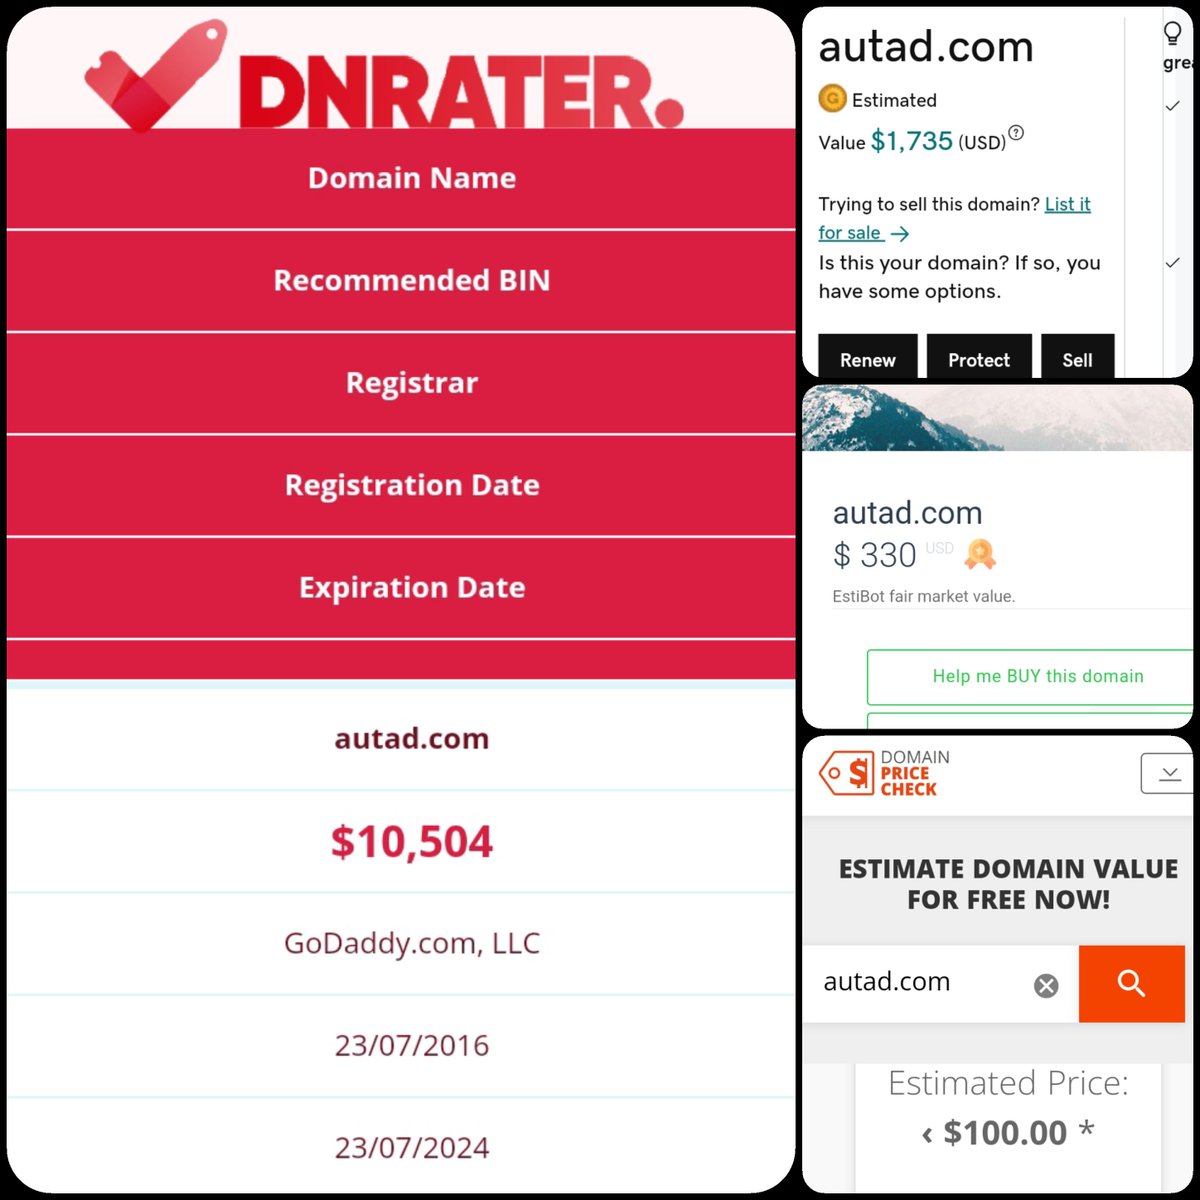 🌐 Autad .com

💰Sold Price : $14,888
✔@dnrater Recommended BIN : $10,504
✔Godaddy Estimation : $1,735
✔Estibot Valuation : $330
✔Pc domains Appraisal : <$100

📌Venue : #DomainMarket